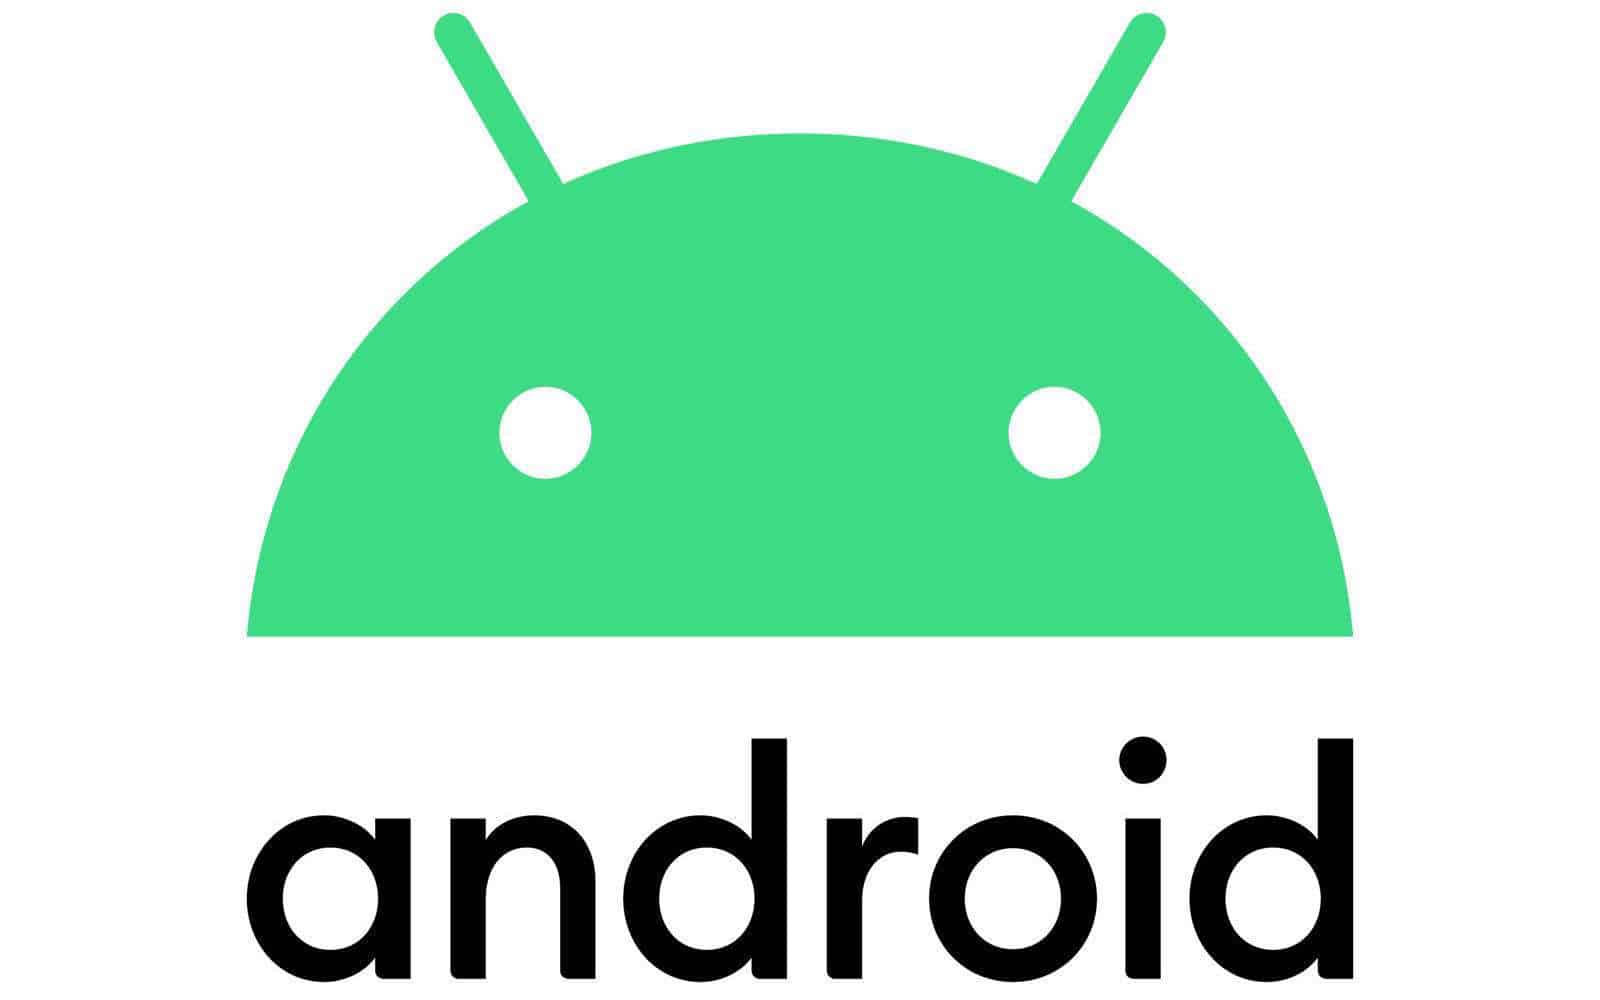 logo Android 10